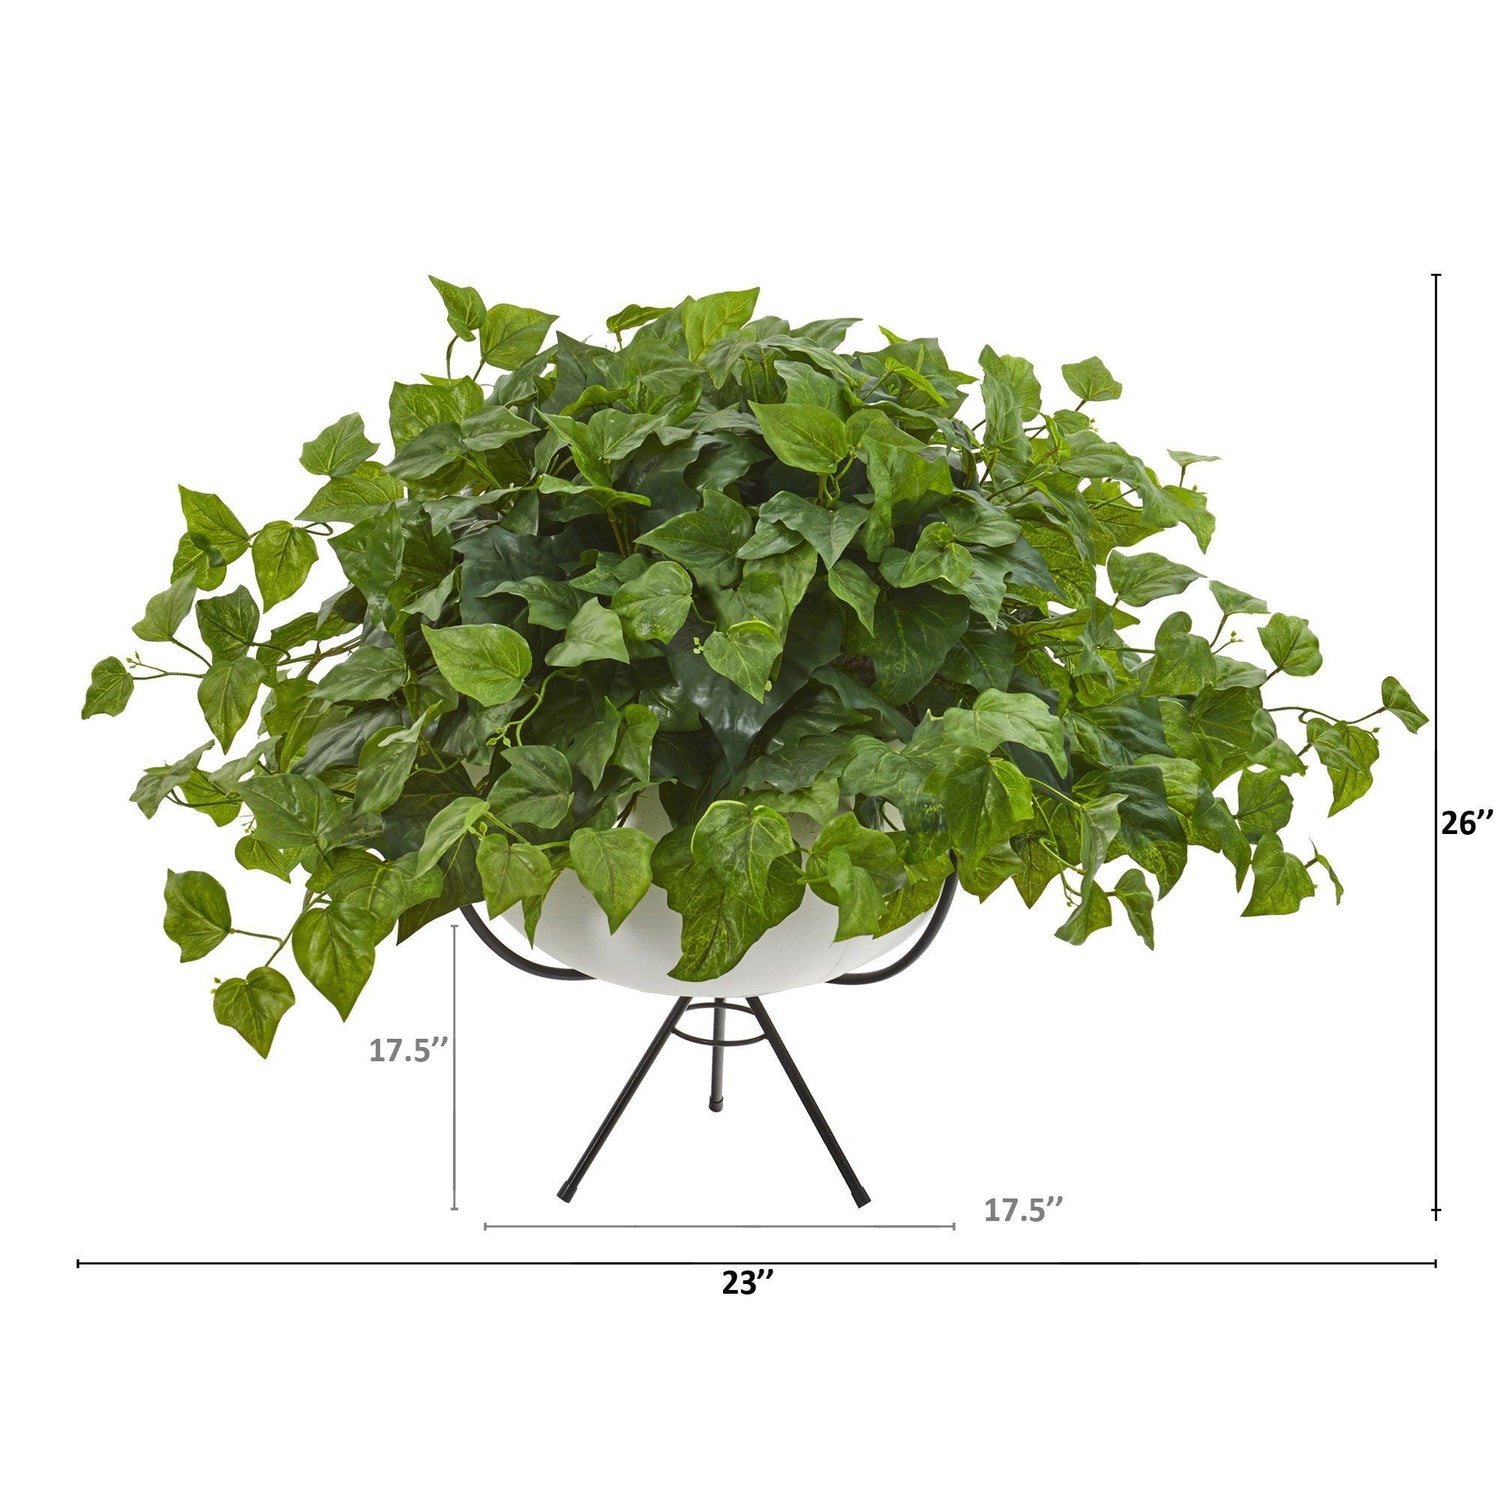 26” London Ivy Artificial Plant in White Planter with Metal Stand (Real Touch)